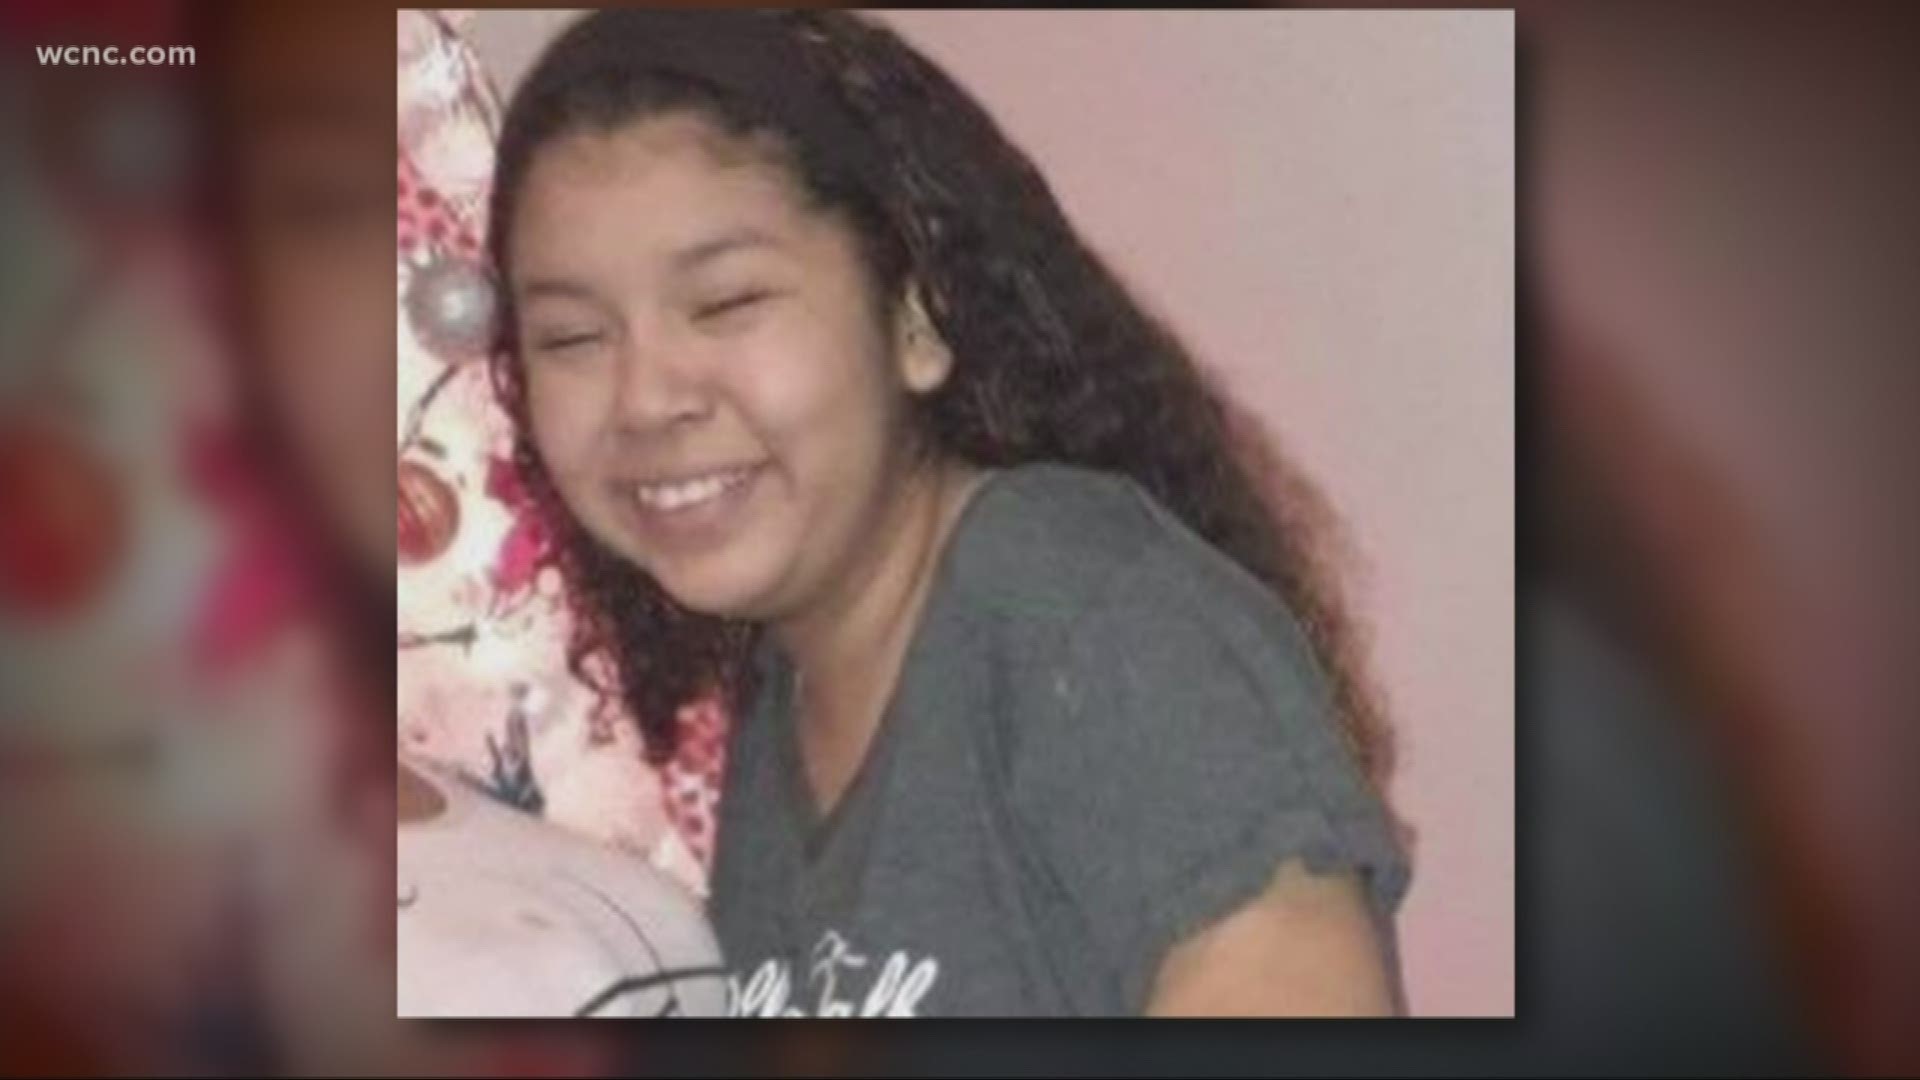 Ashley Lopez, 11, and her family recently moved to South Carolina. The missing girl has ties to Charlotte, according to the West Columbia Police Department.